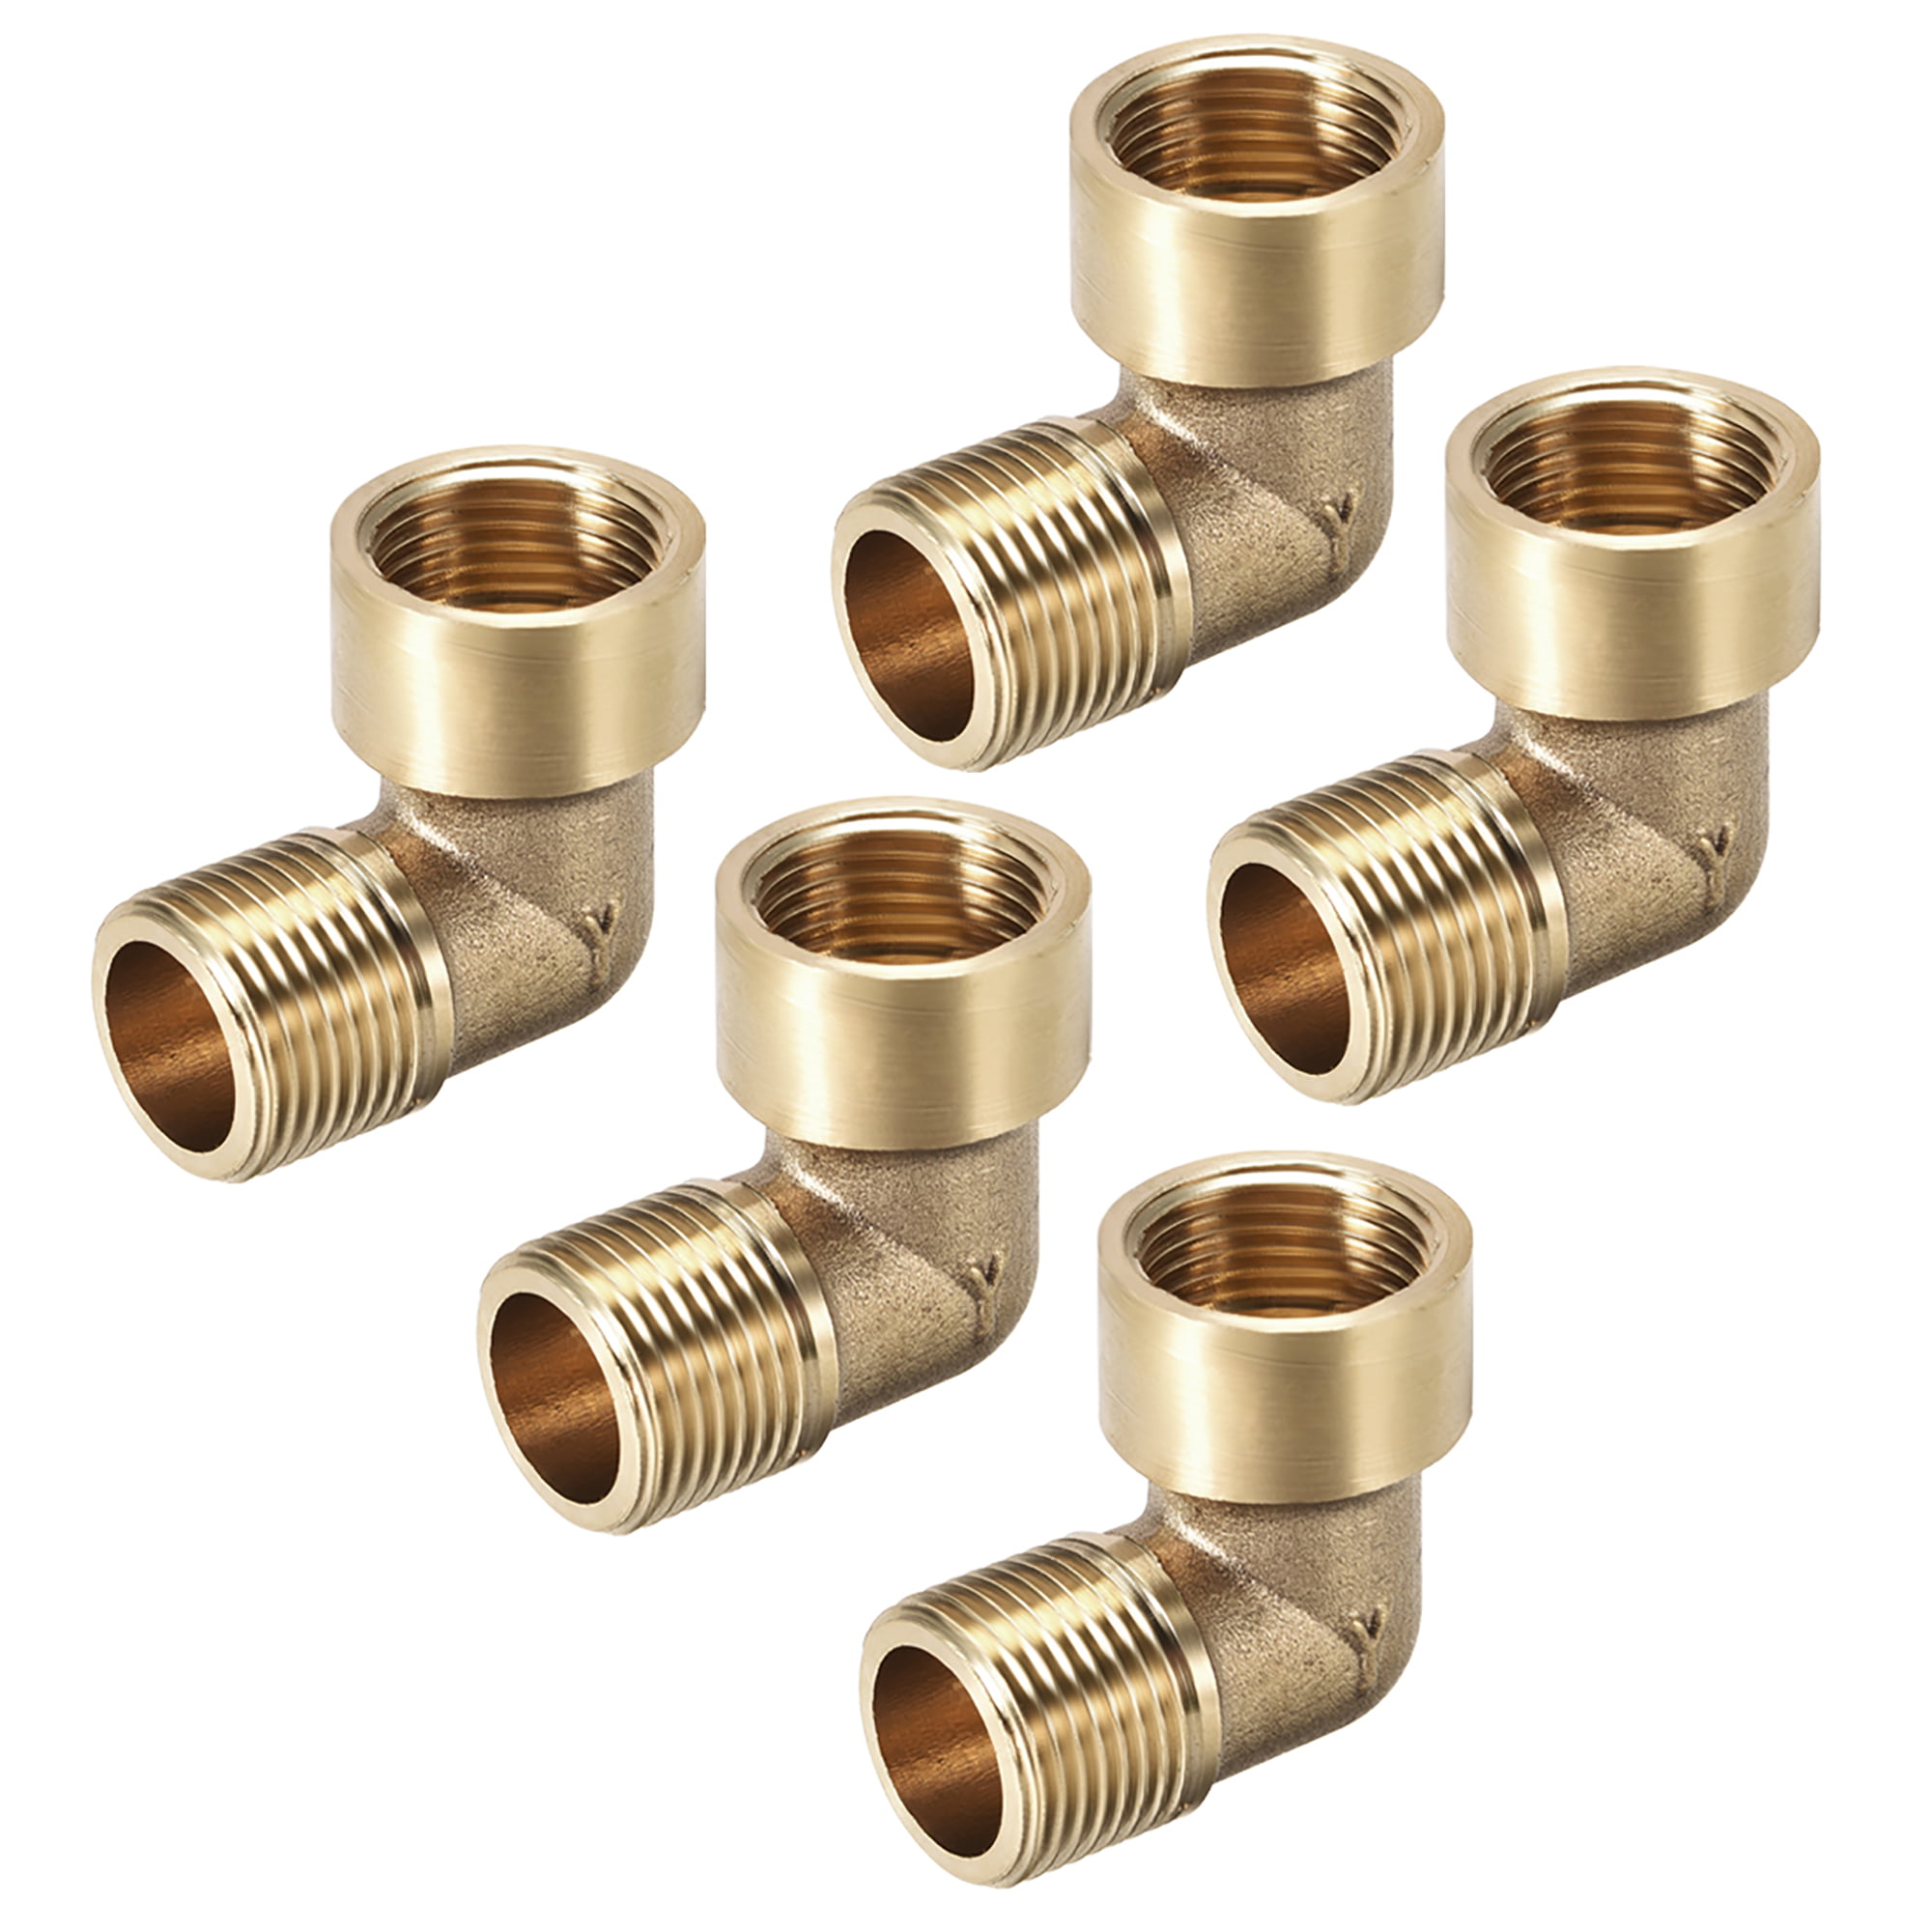 Brass Pipe Fitting,90 Degree Elbow,3/8 BSP Male x 3/8 BSP Female 5pcs 